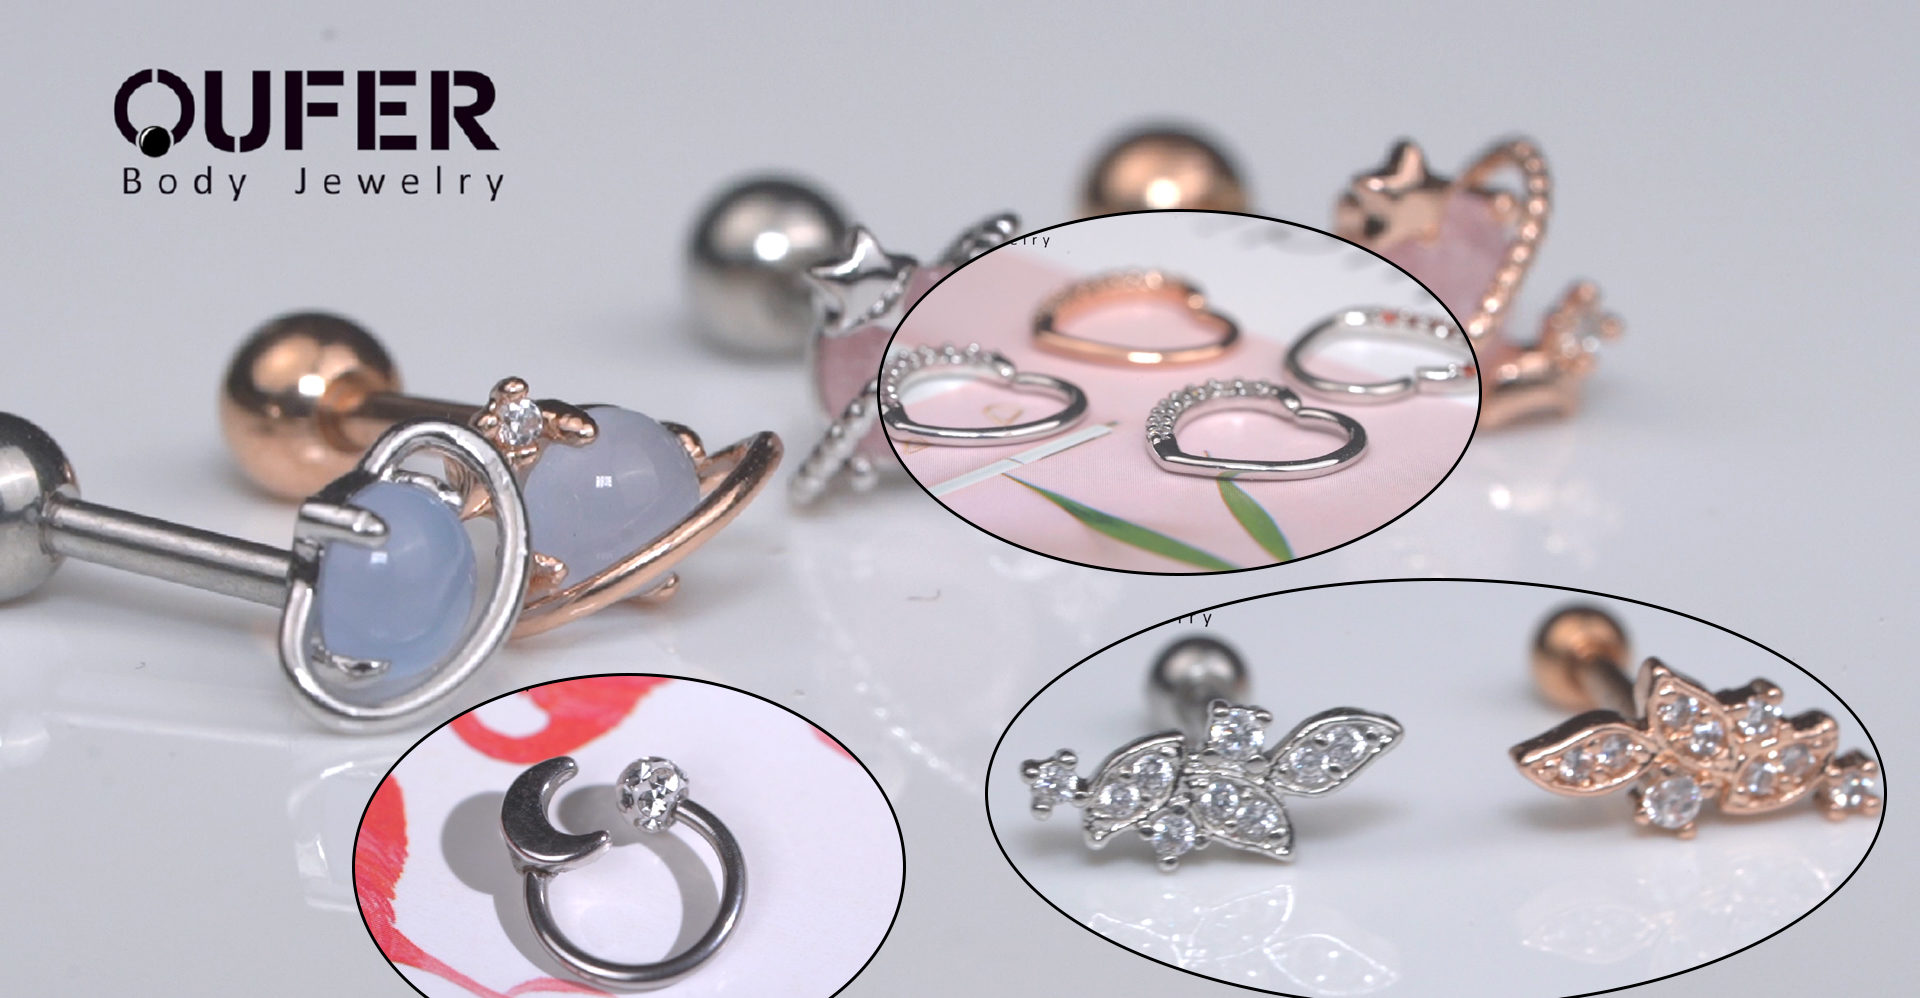 OUFER BODY JEWELRY - Visit PopSocket’s Page for the Latest and Greatest Discounts, Today!